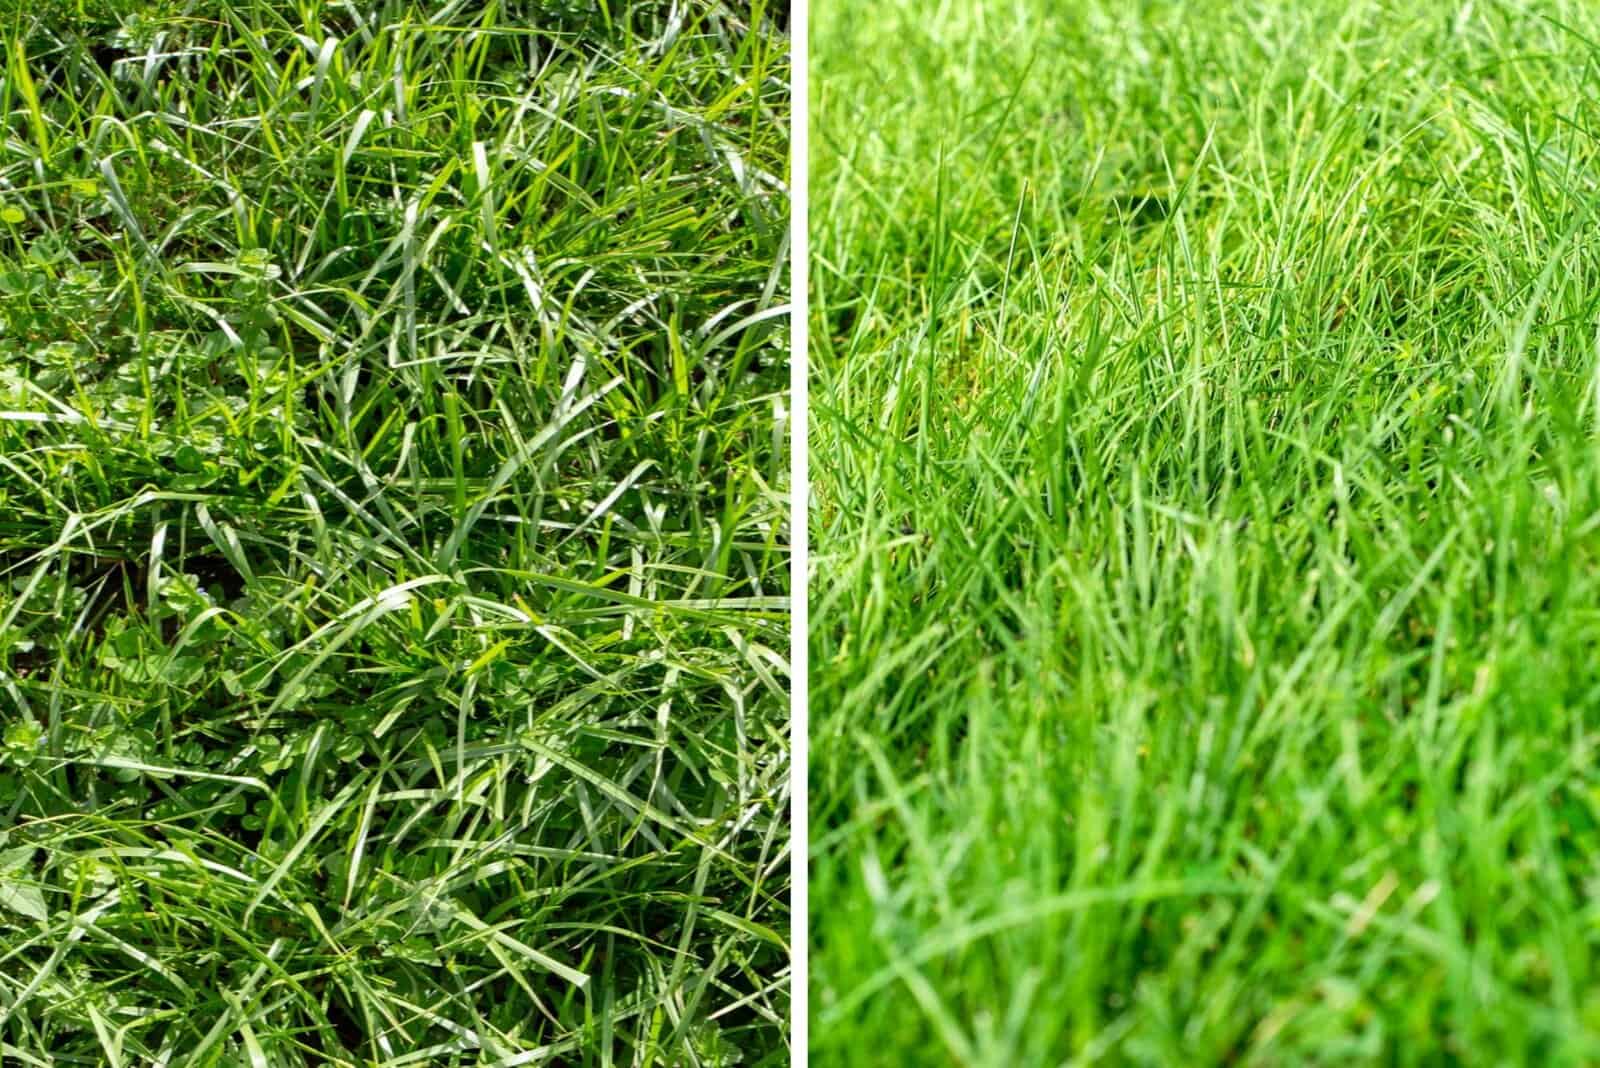 Ryegrass and Fescue grass close up